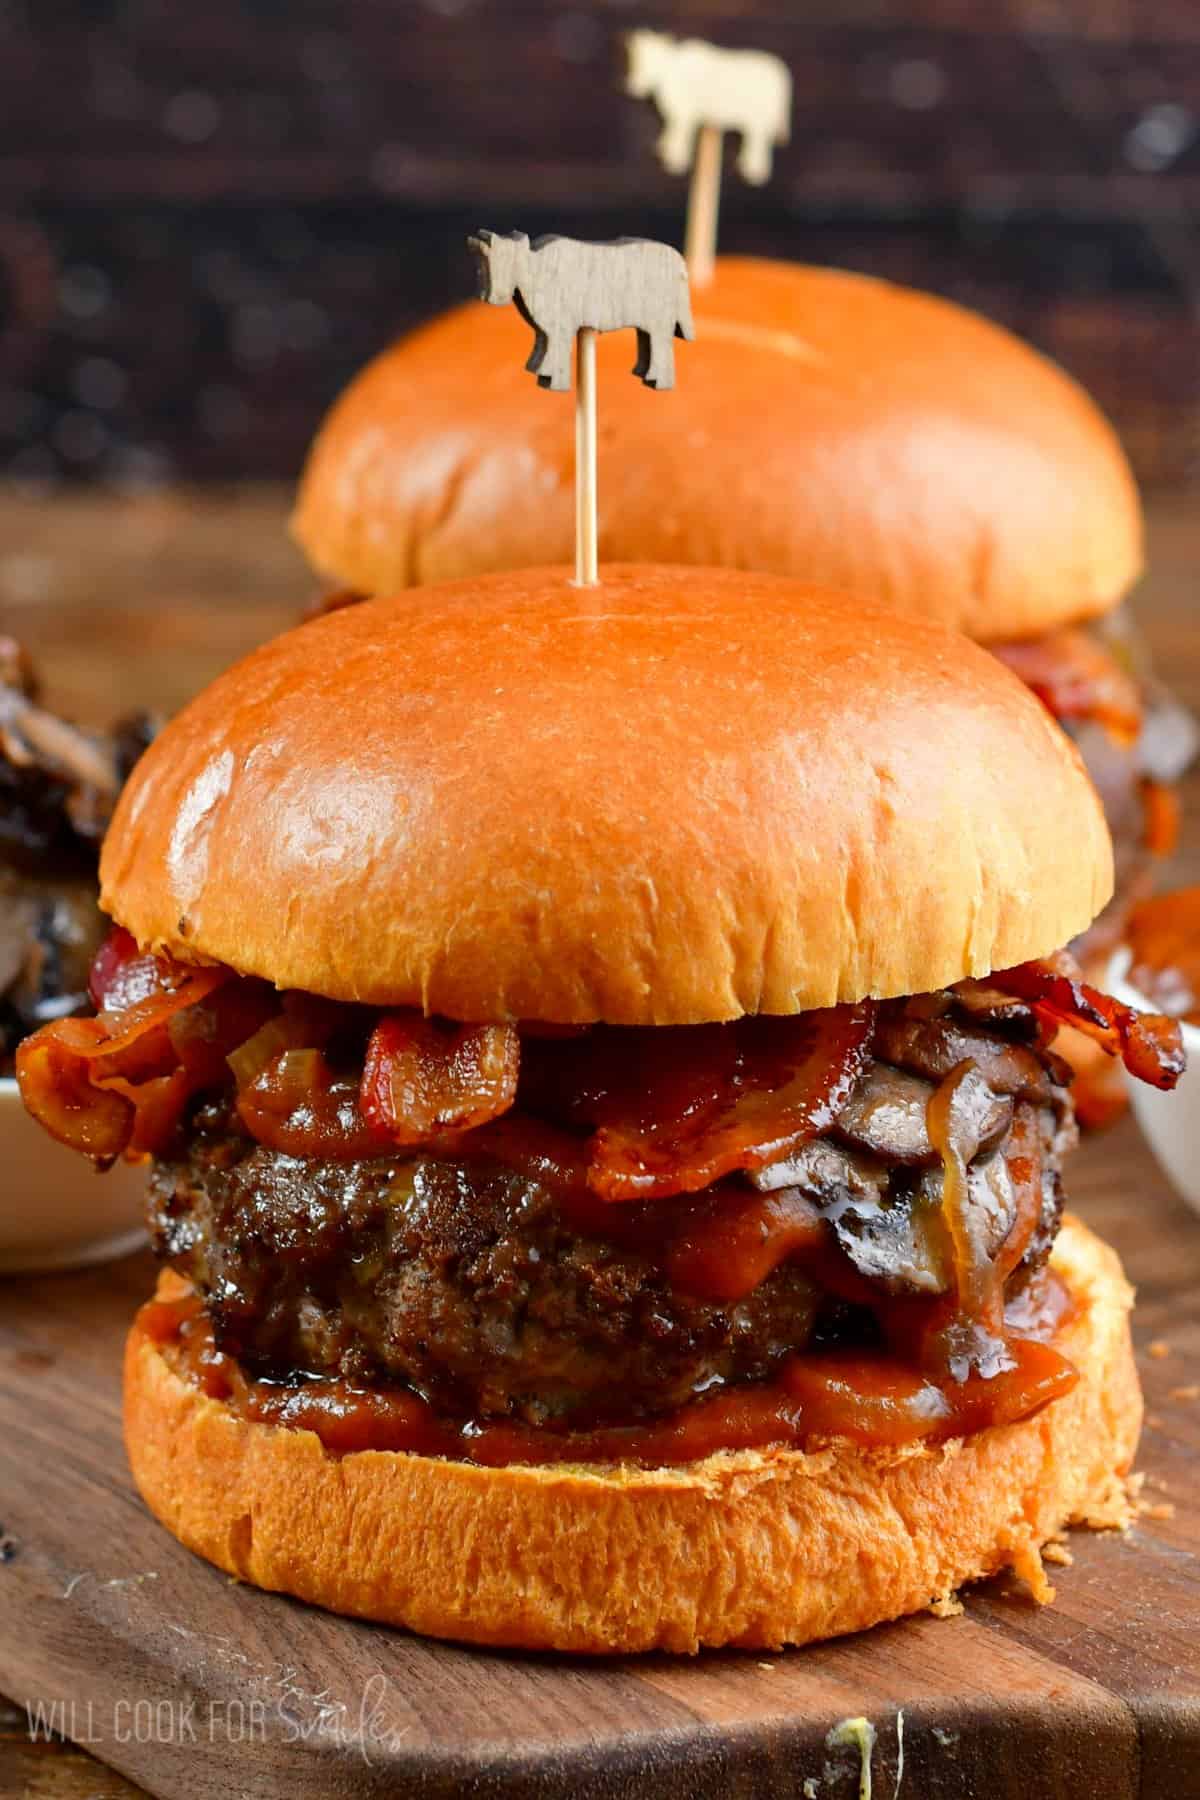 Two burgers with sauteed mushrooms, bacon, and whiskey sauce on a bun on a wood surface.